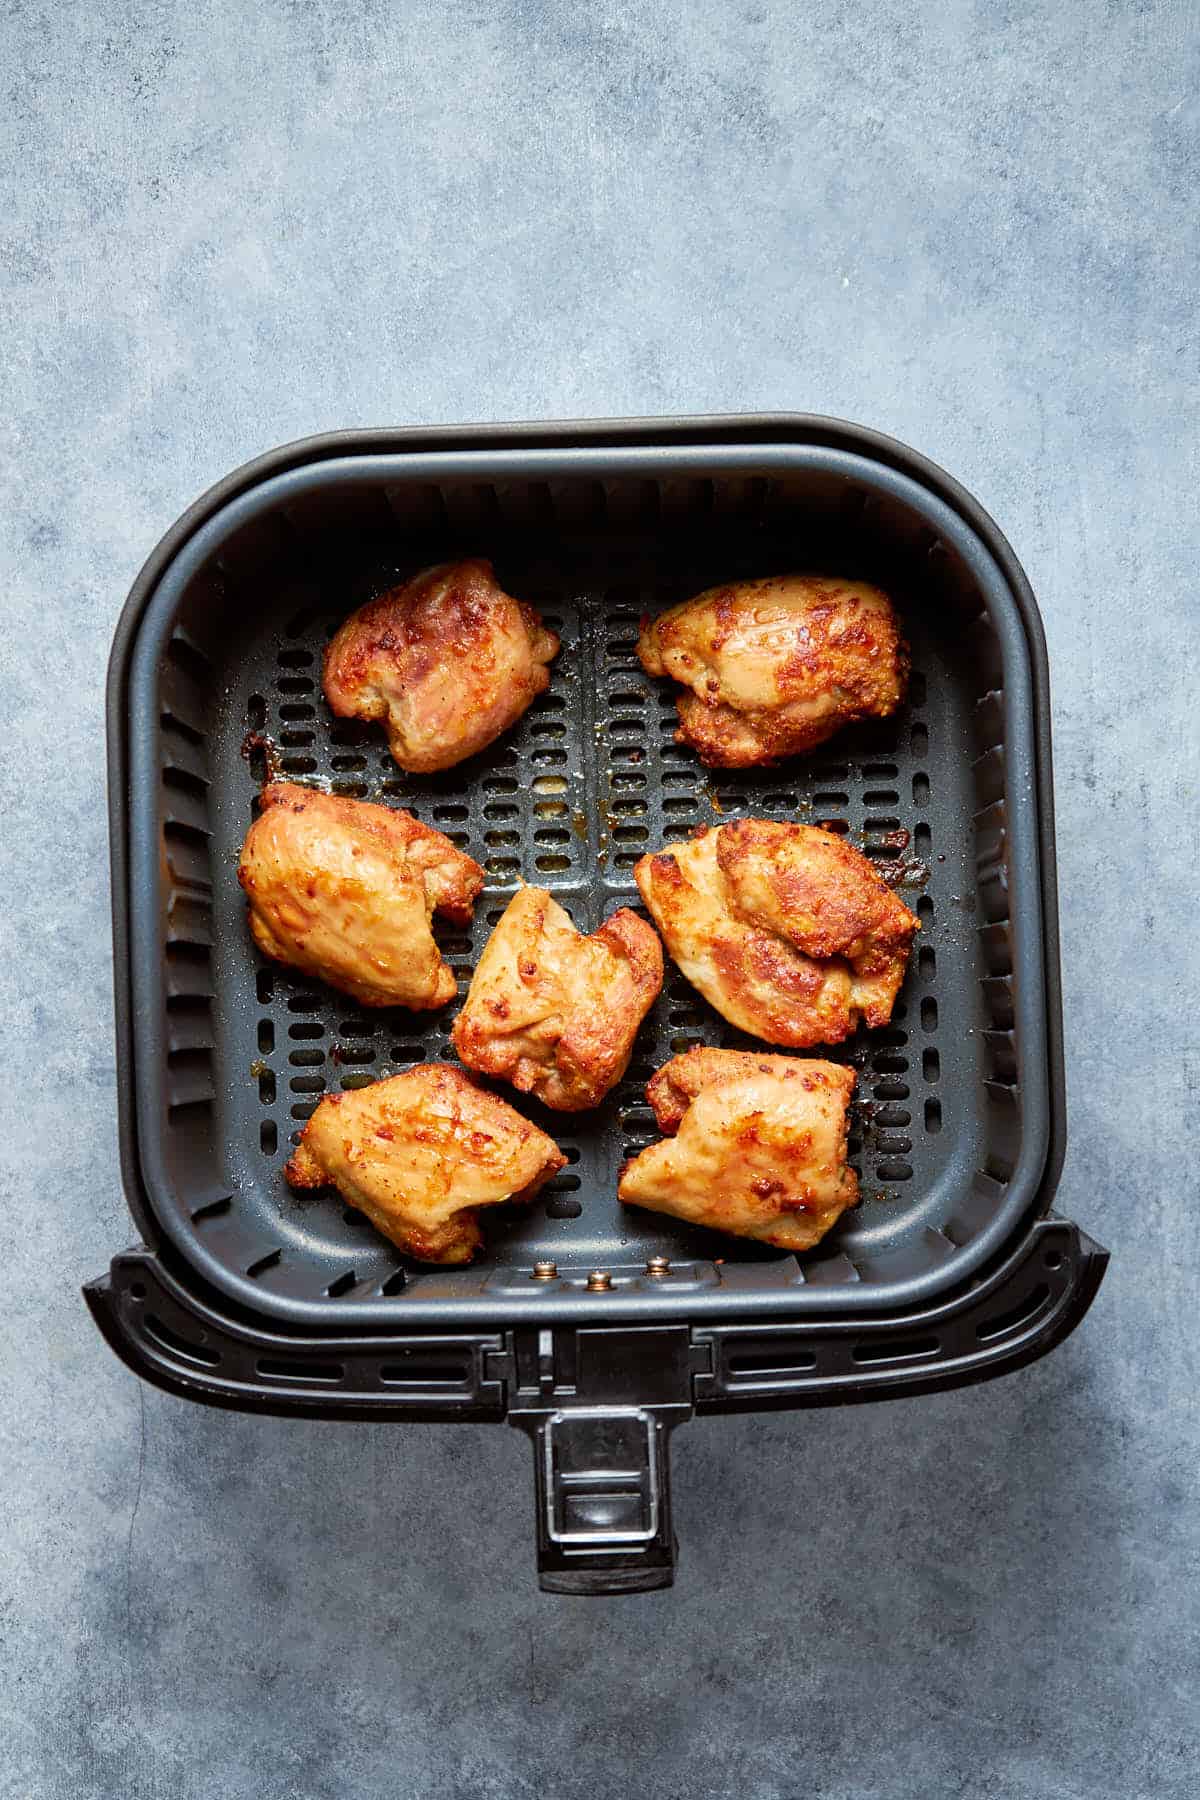 Cooked meat inside the air fryer basket